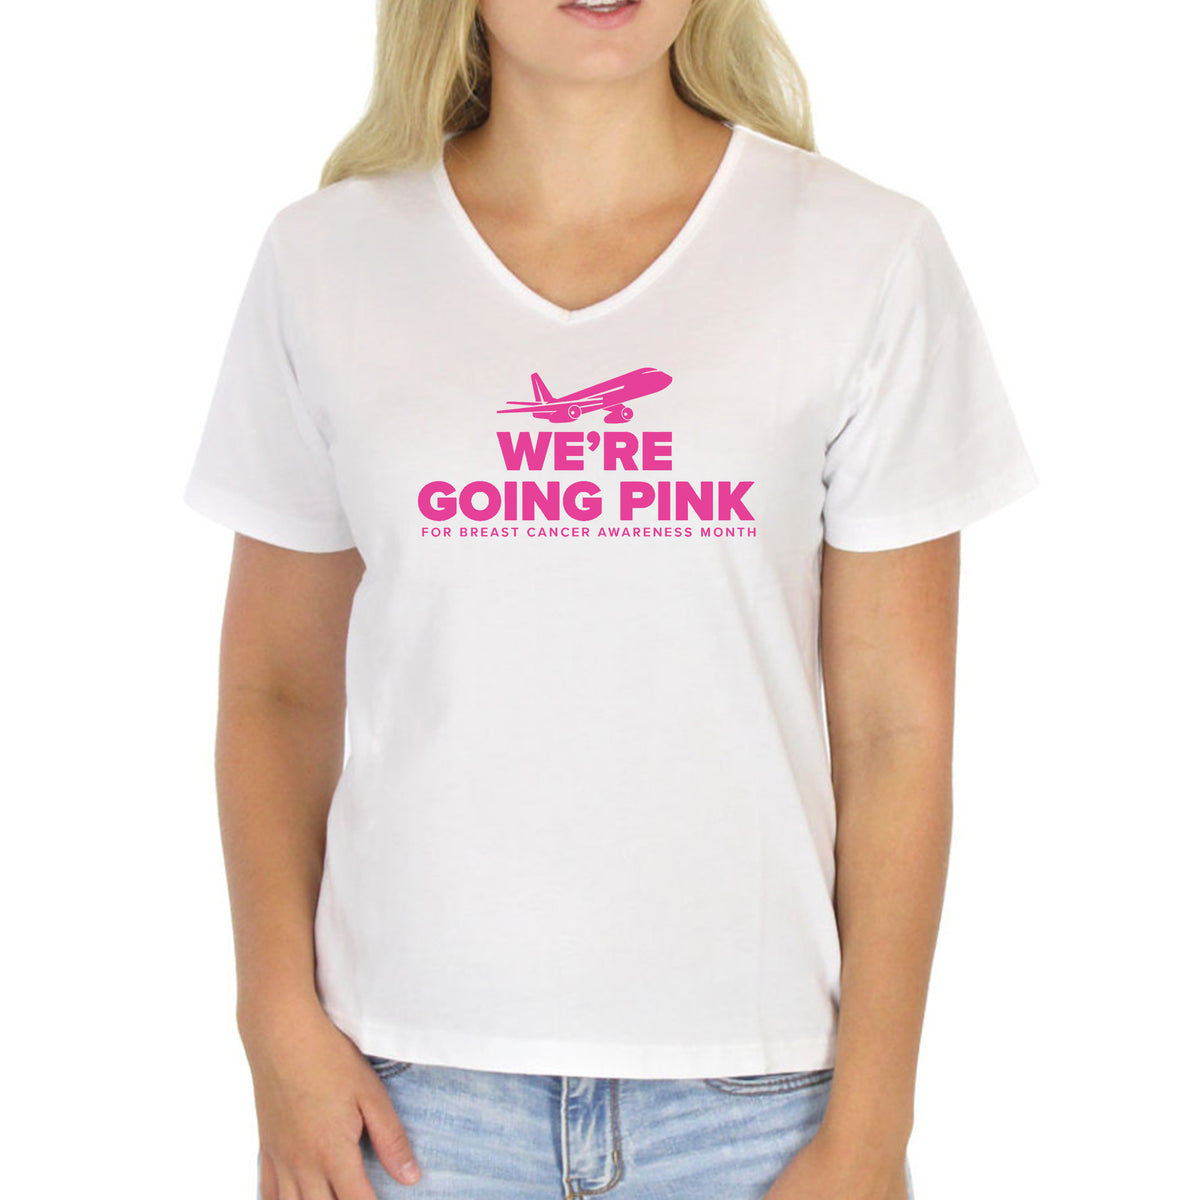 Going Out Tops for Women Pink Shirts for Women Breast Cancer Shirt